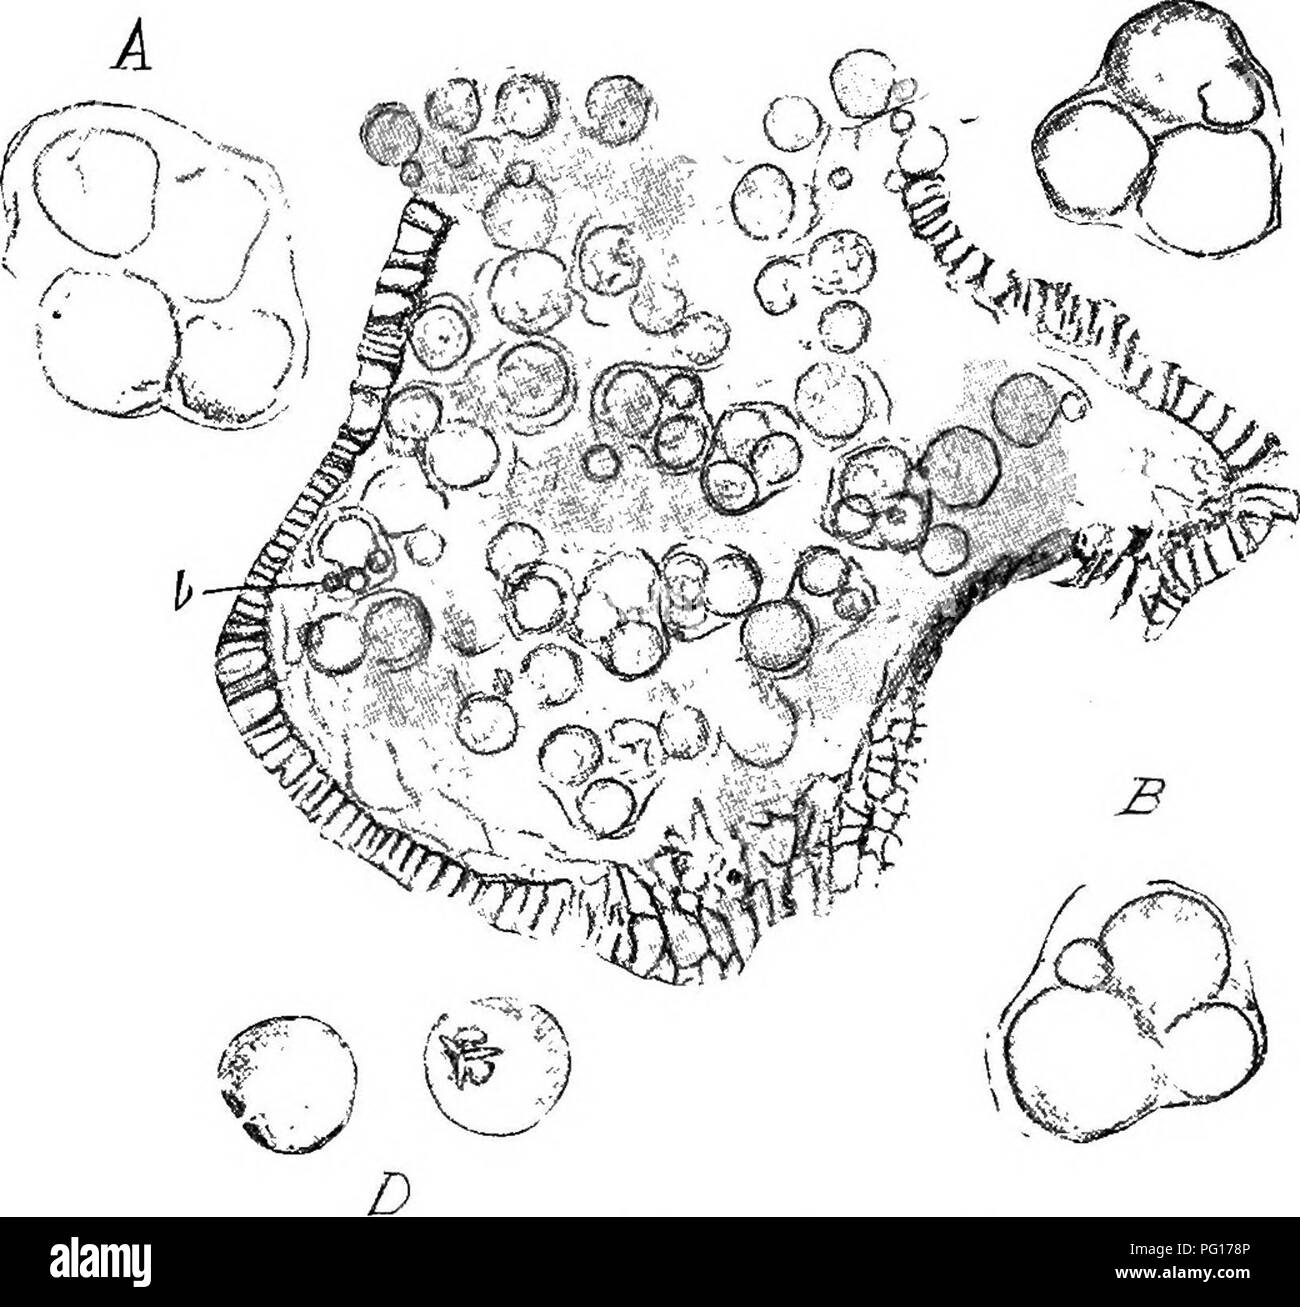 . Studies in fossil botany . Paleobotany. 56 STUDIES IN FOSSIL BOTANY •practically identical with the homosporous species C. Binneyana, the differences between them being of a trivial kind. In some of the sporangia, however, numerous small spores are contained—slightly smaller than those c. Fig. 22.—Calamostachys Binneyci7ia. A single sporangiumj containing spores in tetrads. Many of the spores are abortive (£). The structure of the sporangial wall is well shown. X ioo. A. Tetrad with all four spores about equal. B, C. Tetrads, each with one abortive spore. D. Ripe spores showing the triradiat Stock Photo